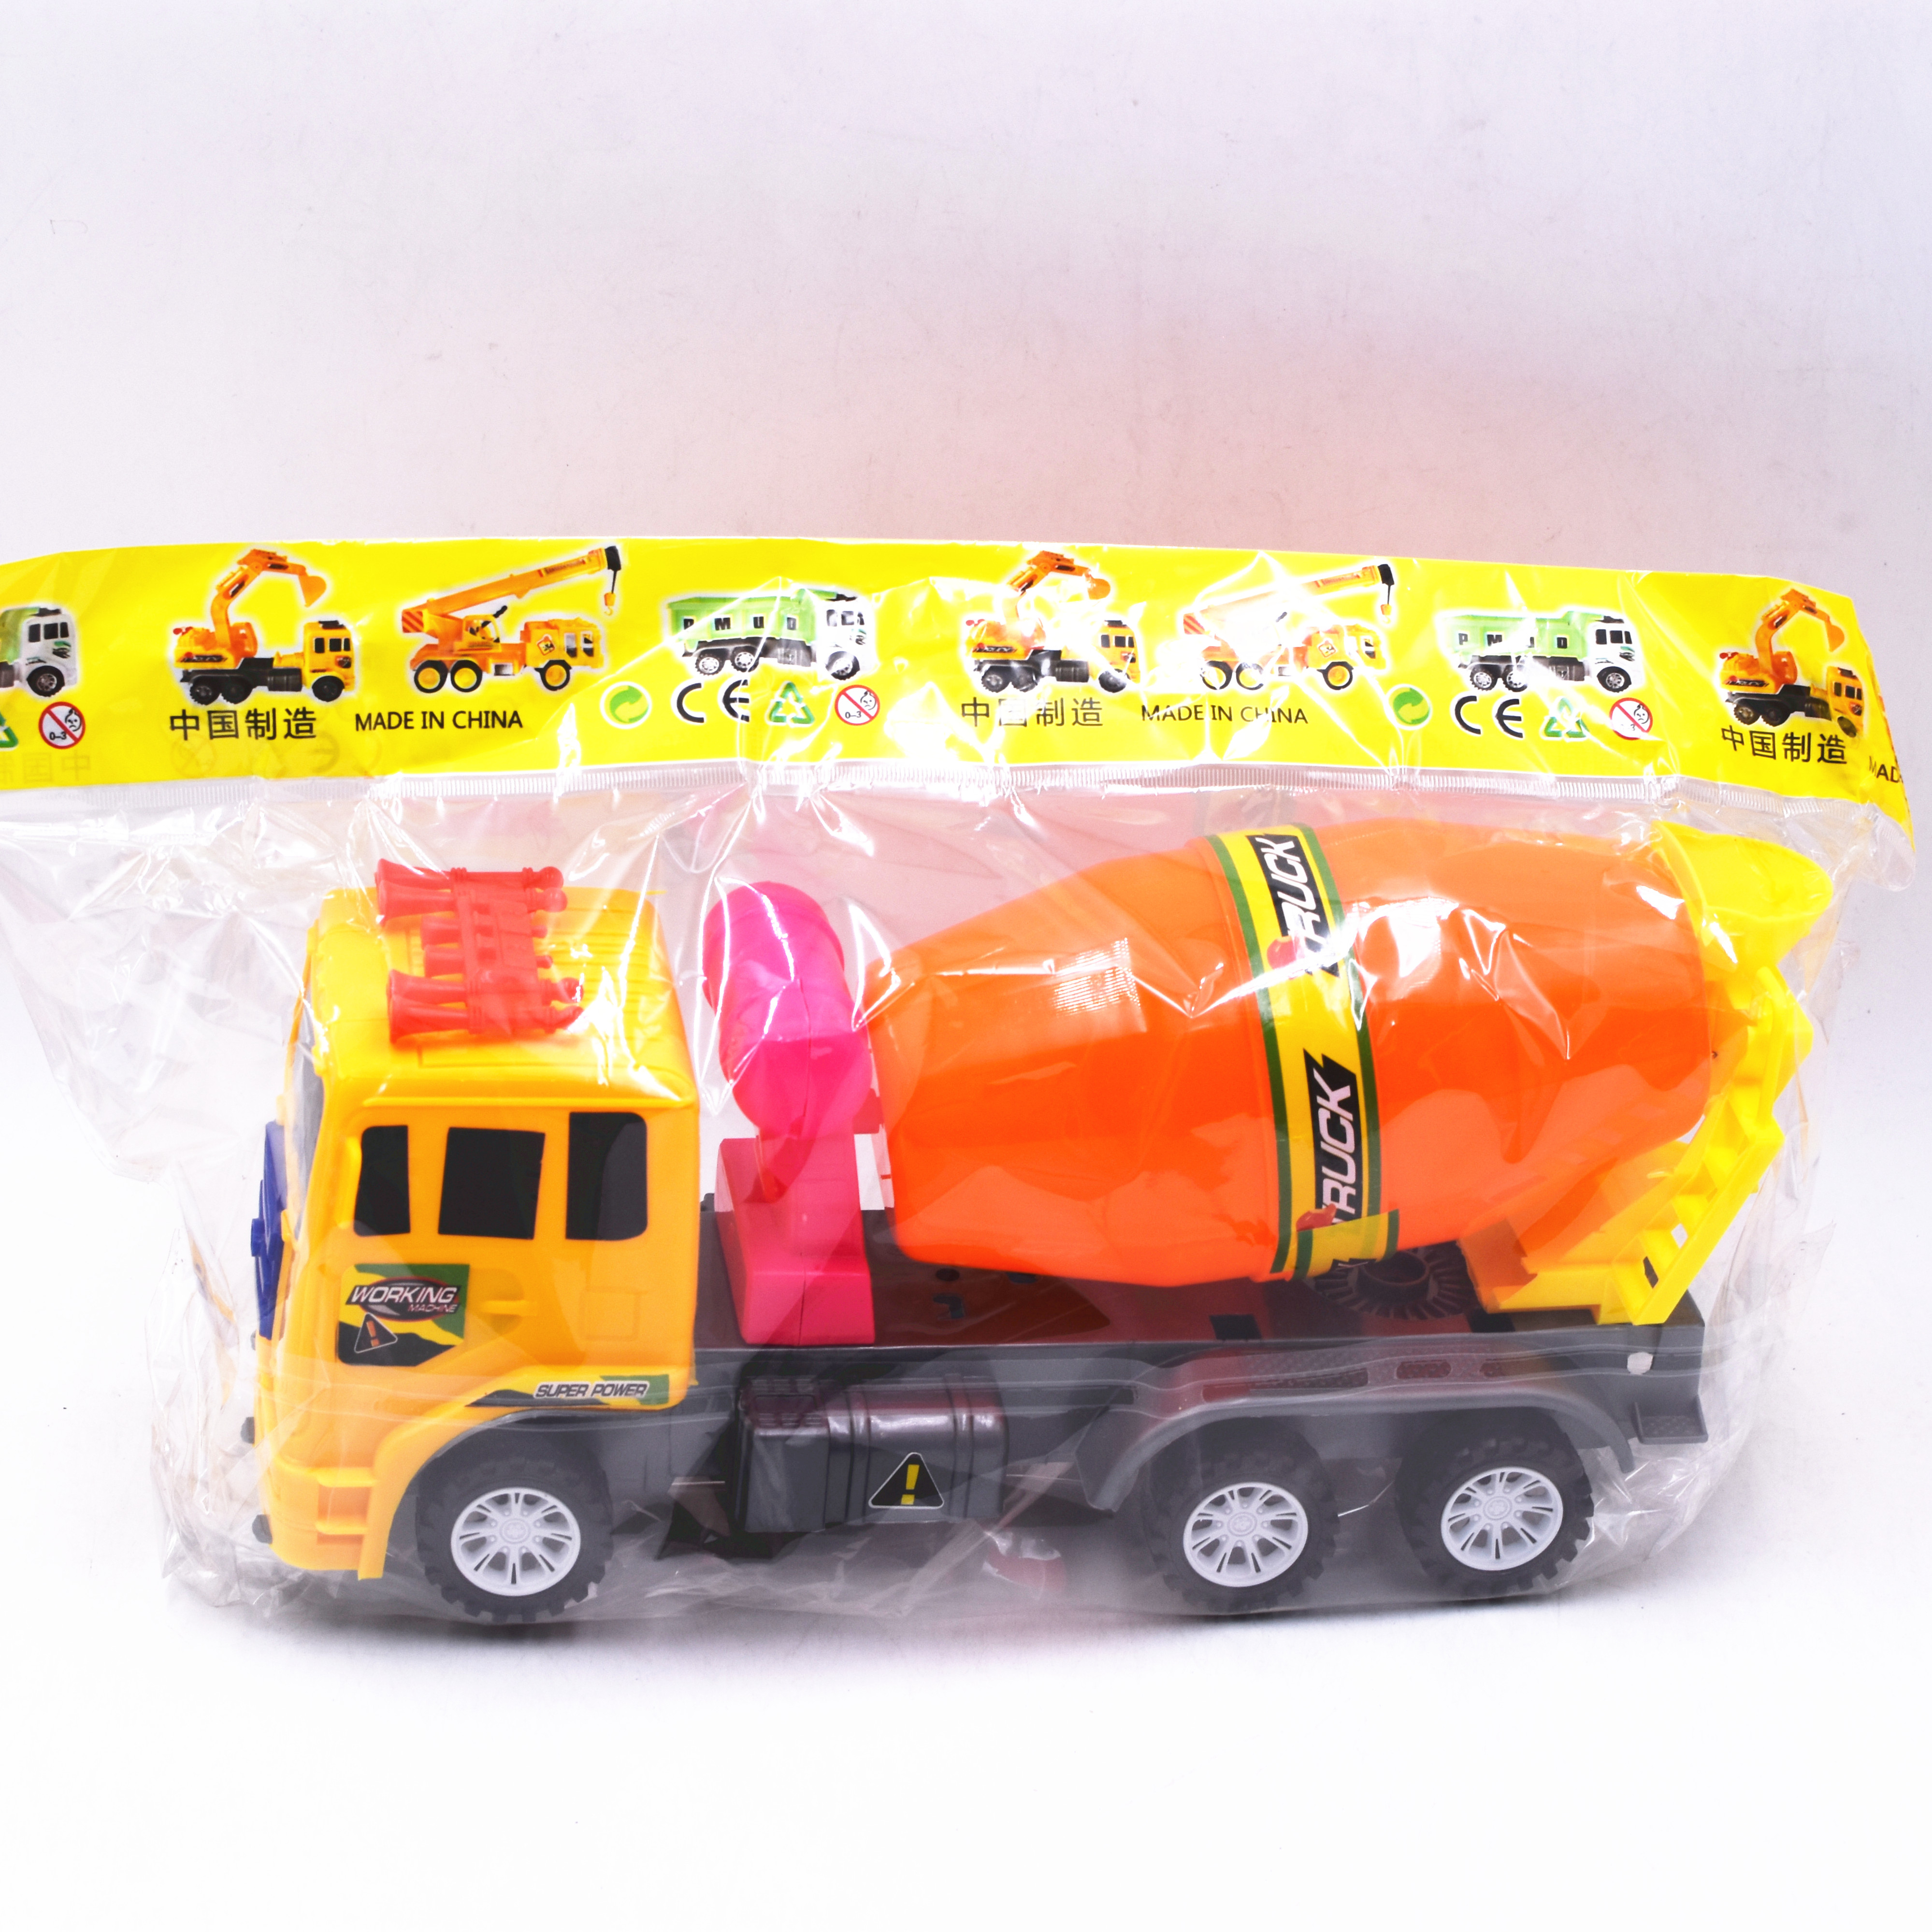 FREE WHEEL TRUCK TOY LY1756